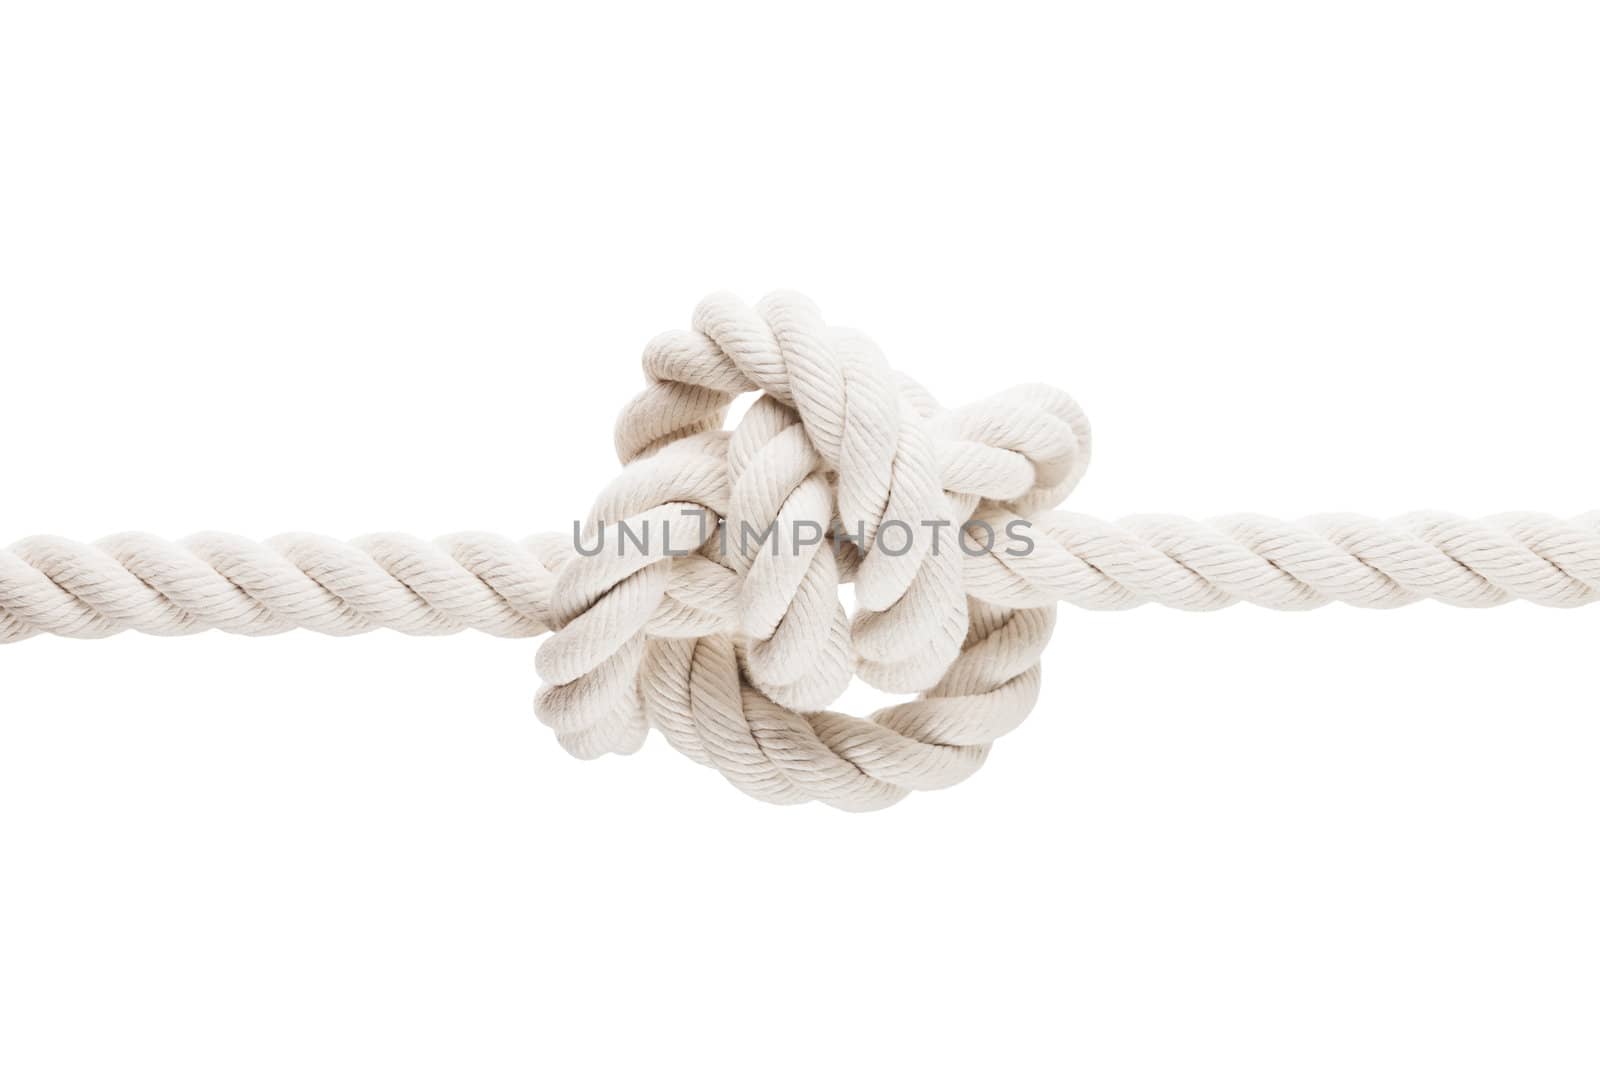 Tied knot on rope or spring by ia_64